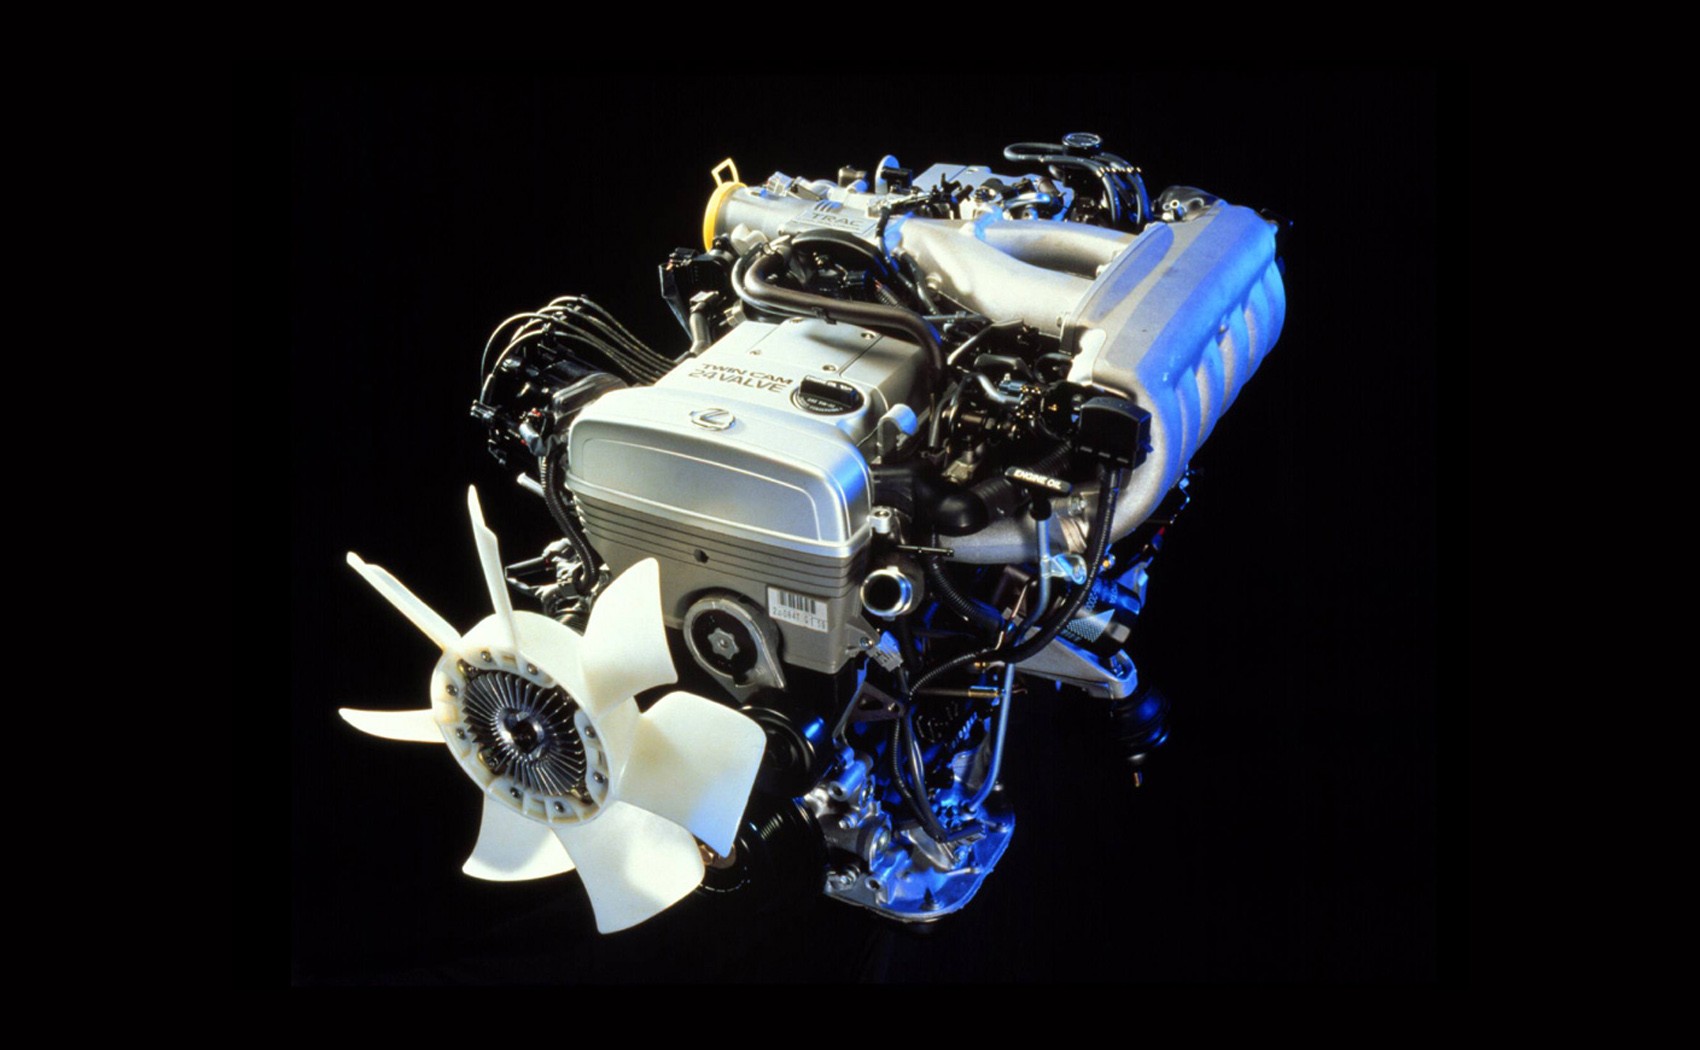 The 2JZ Engine powered the iconic Supra MKIV